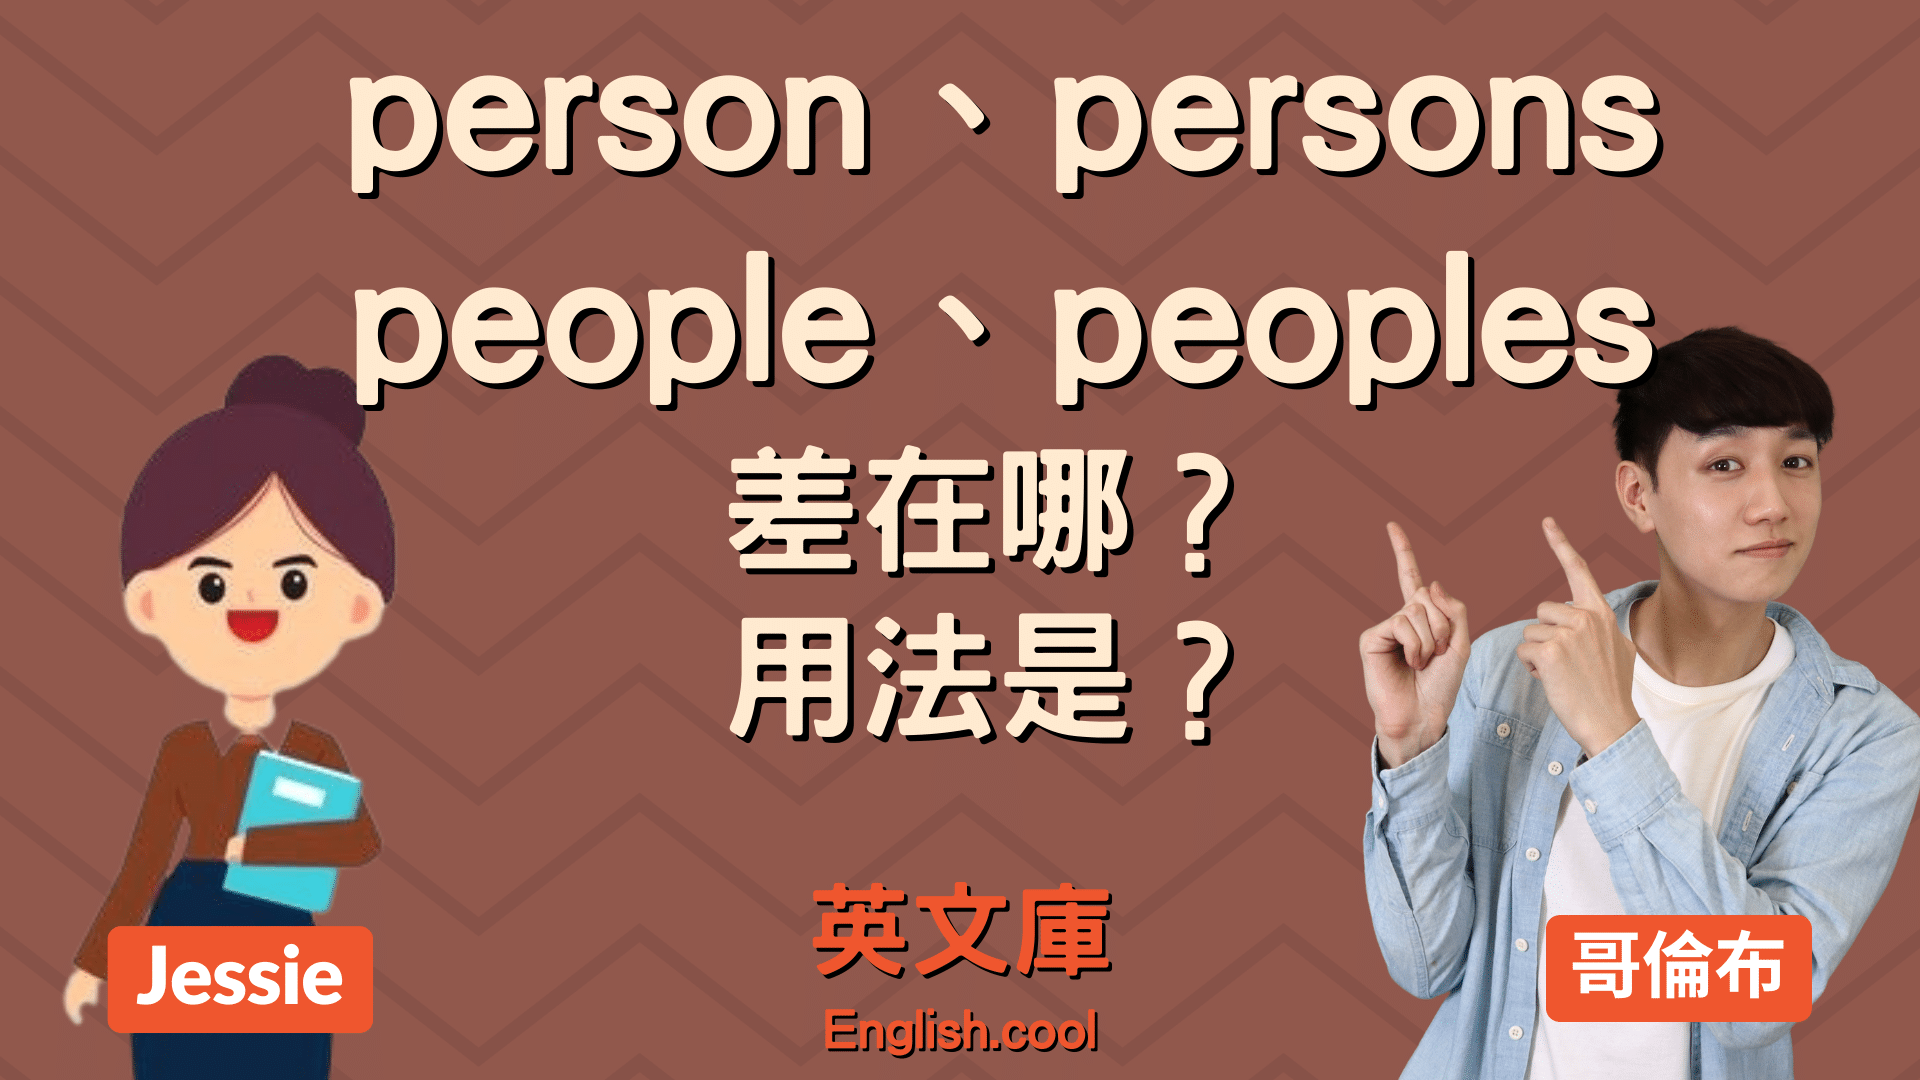 You are currently viewing person、persons、people、peoples 差在哪？用法是？